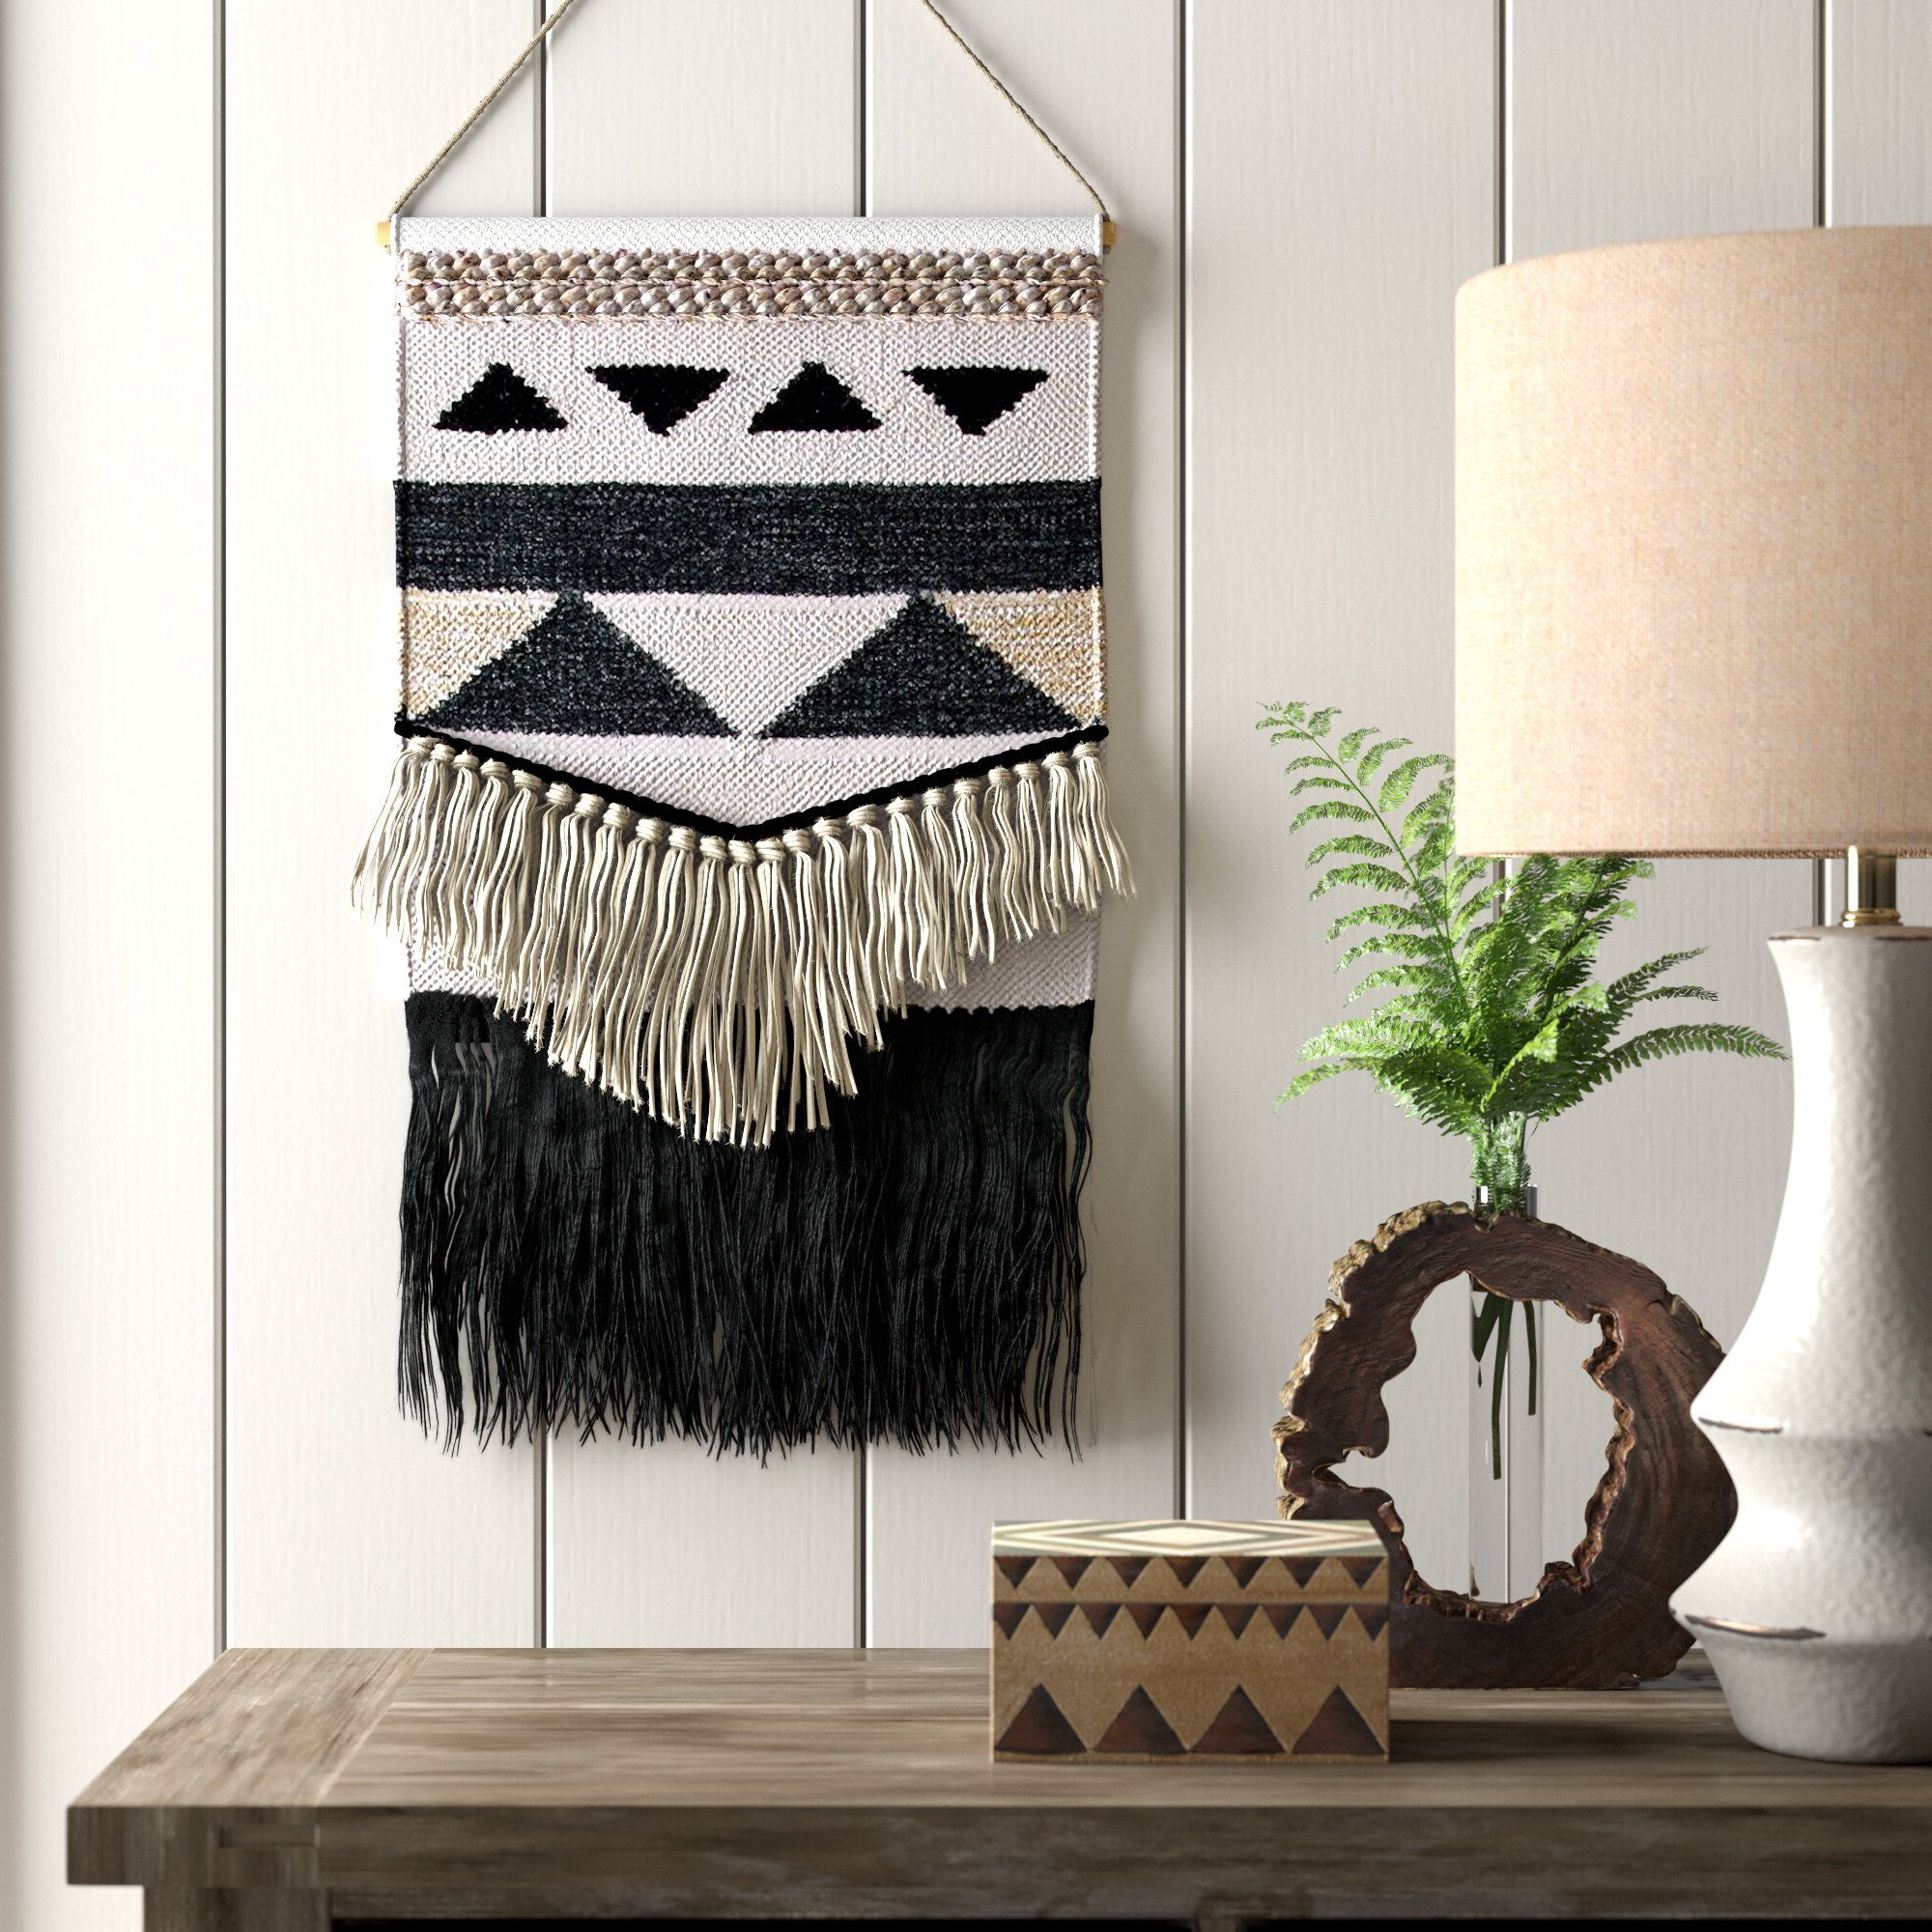 Blended Fabric Wall Hanging With Hanging Accessories Included Pertaining To Favorite Blended Fabric Wall Hangings (View 10 of 20)